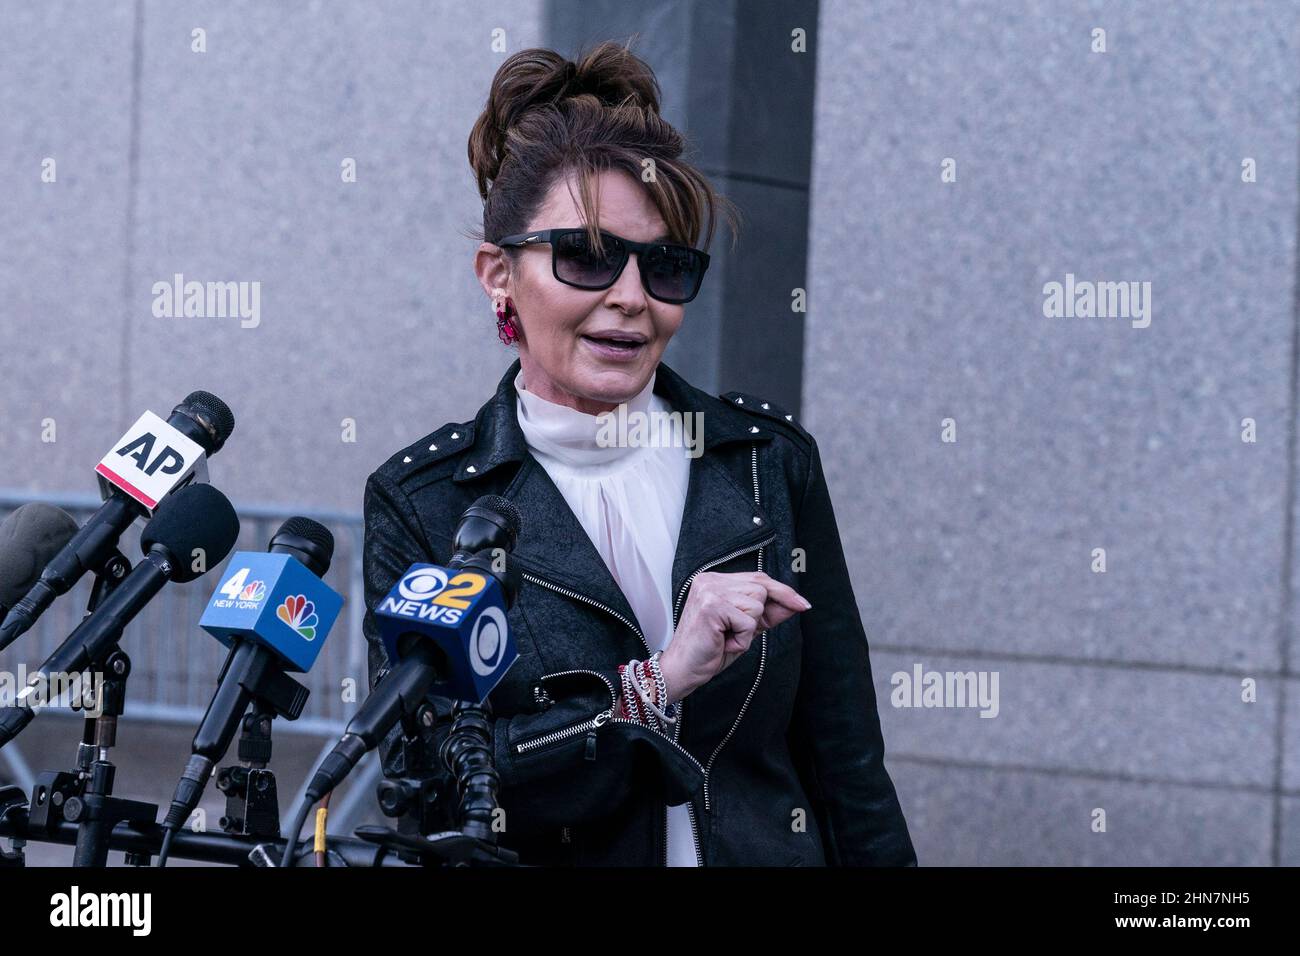 New York, USA. 14th Feb, 2022. Sarah Palin, former Governor of Alaska leaves court after judge Jed Rakoff dismissed her libel case against The New York Times at U.S. Southern District Court in New York on february 14, 2022. She briefly addressed the media in front of the court. The jury is still deliberating as the judge made his decision apparently did not know about it. The judge said Palin had failed to show that The New York Times had acted out of malice. (Photo by Lev Radin/Sipa USA) Credit: Sipa USA/Alamy Live News Stock Photo